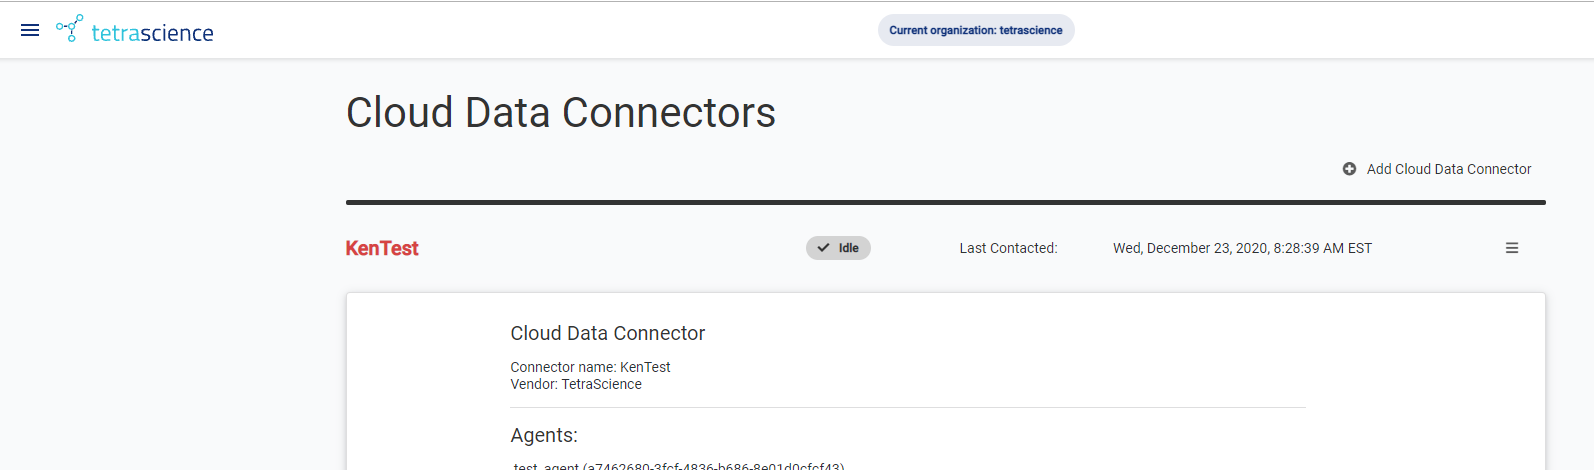 Cloud Data Connector Page